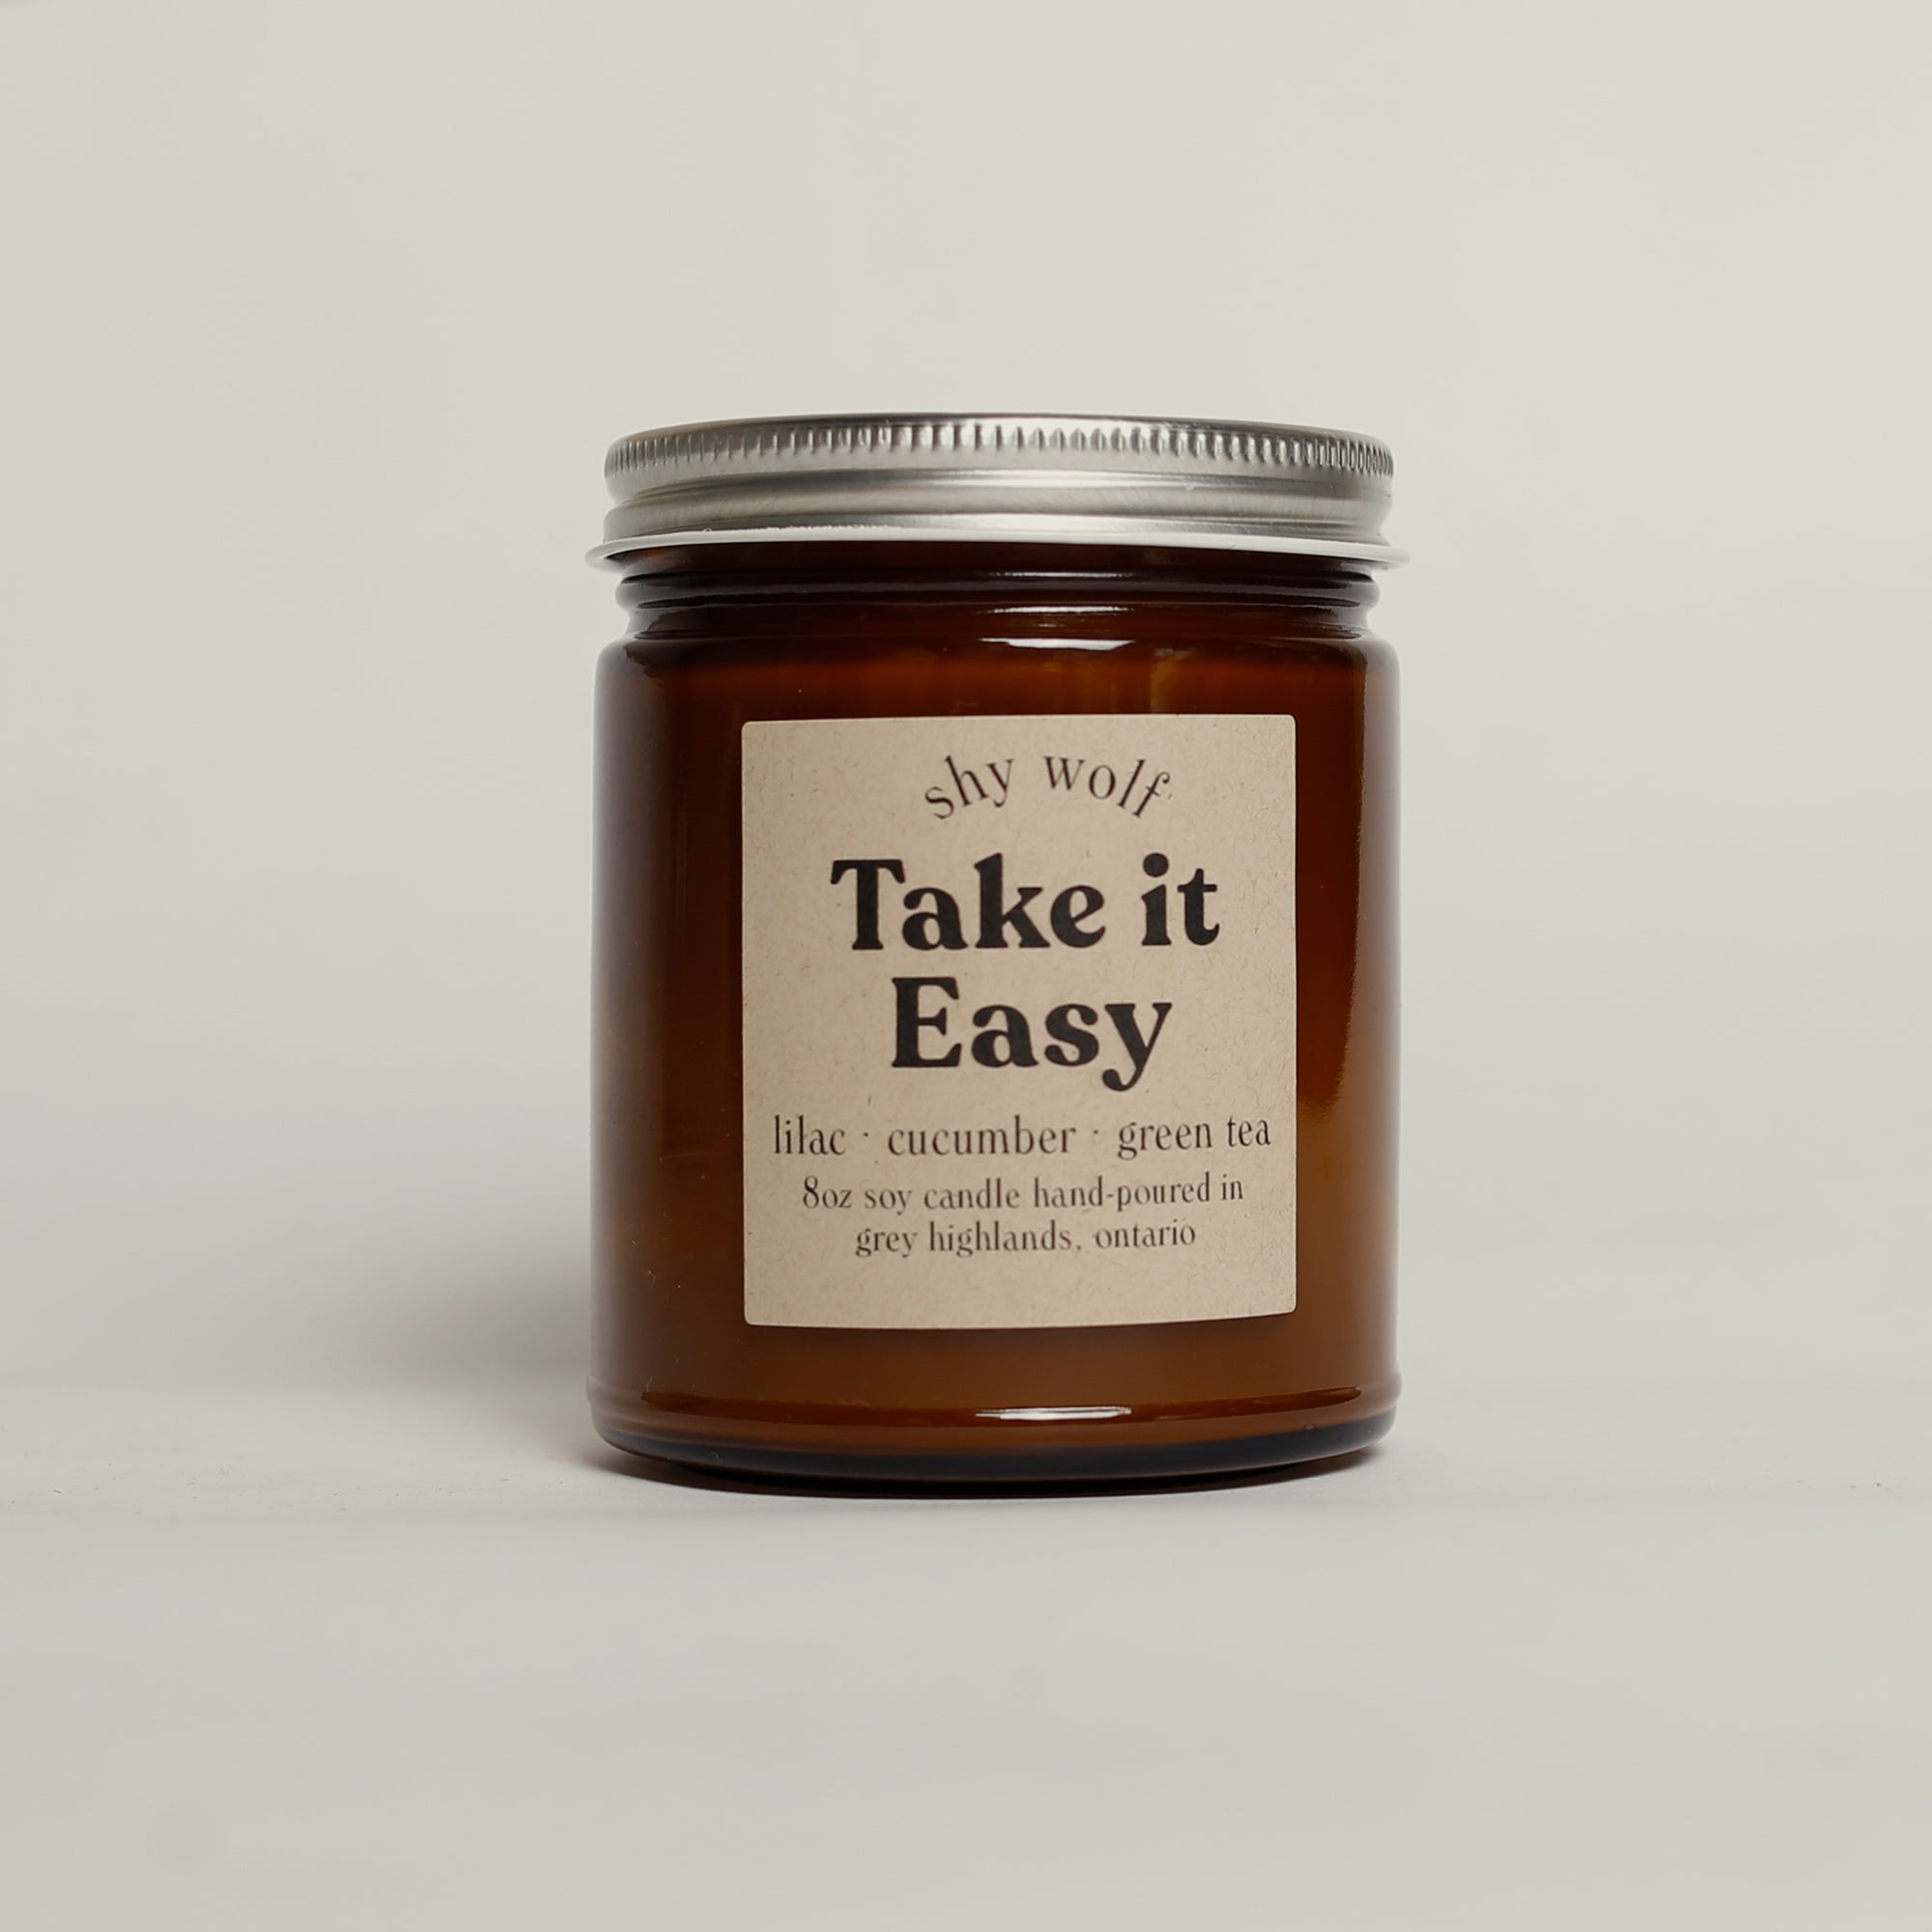 Shy Wolf Candles - Take It Easy